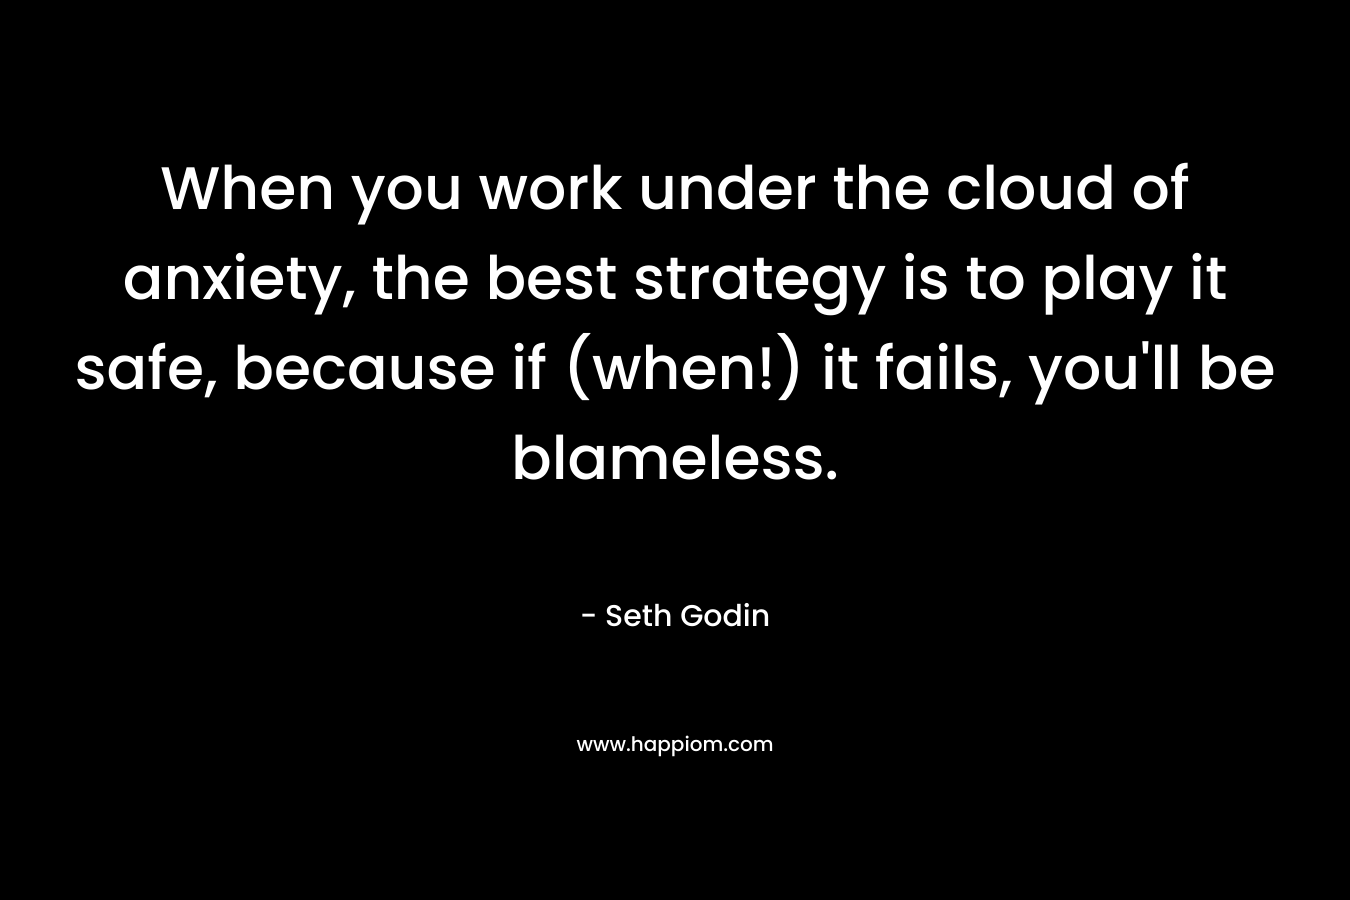 When you work under the cloud of anxiety, the best strategy is to play it safe, because if (when!) it fails, you’ll be blameless. – Seth Godin